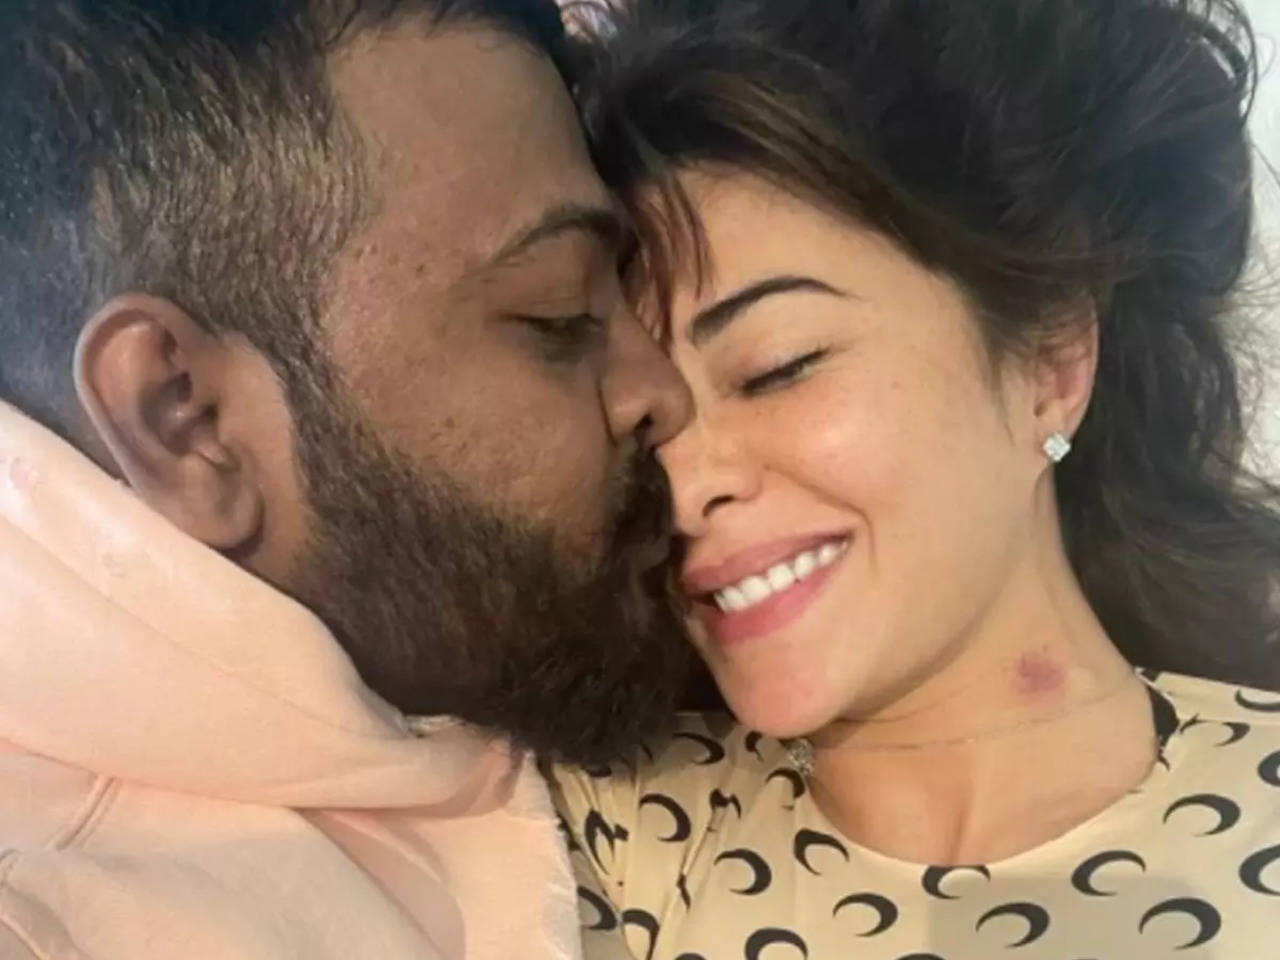 Jecquline Fernandex Xxx - Jacqueline Fernandez and Sukesh Chandrasekhar's new romantic picture goes  viral | Hindi Movie News - Times of India